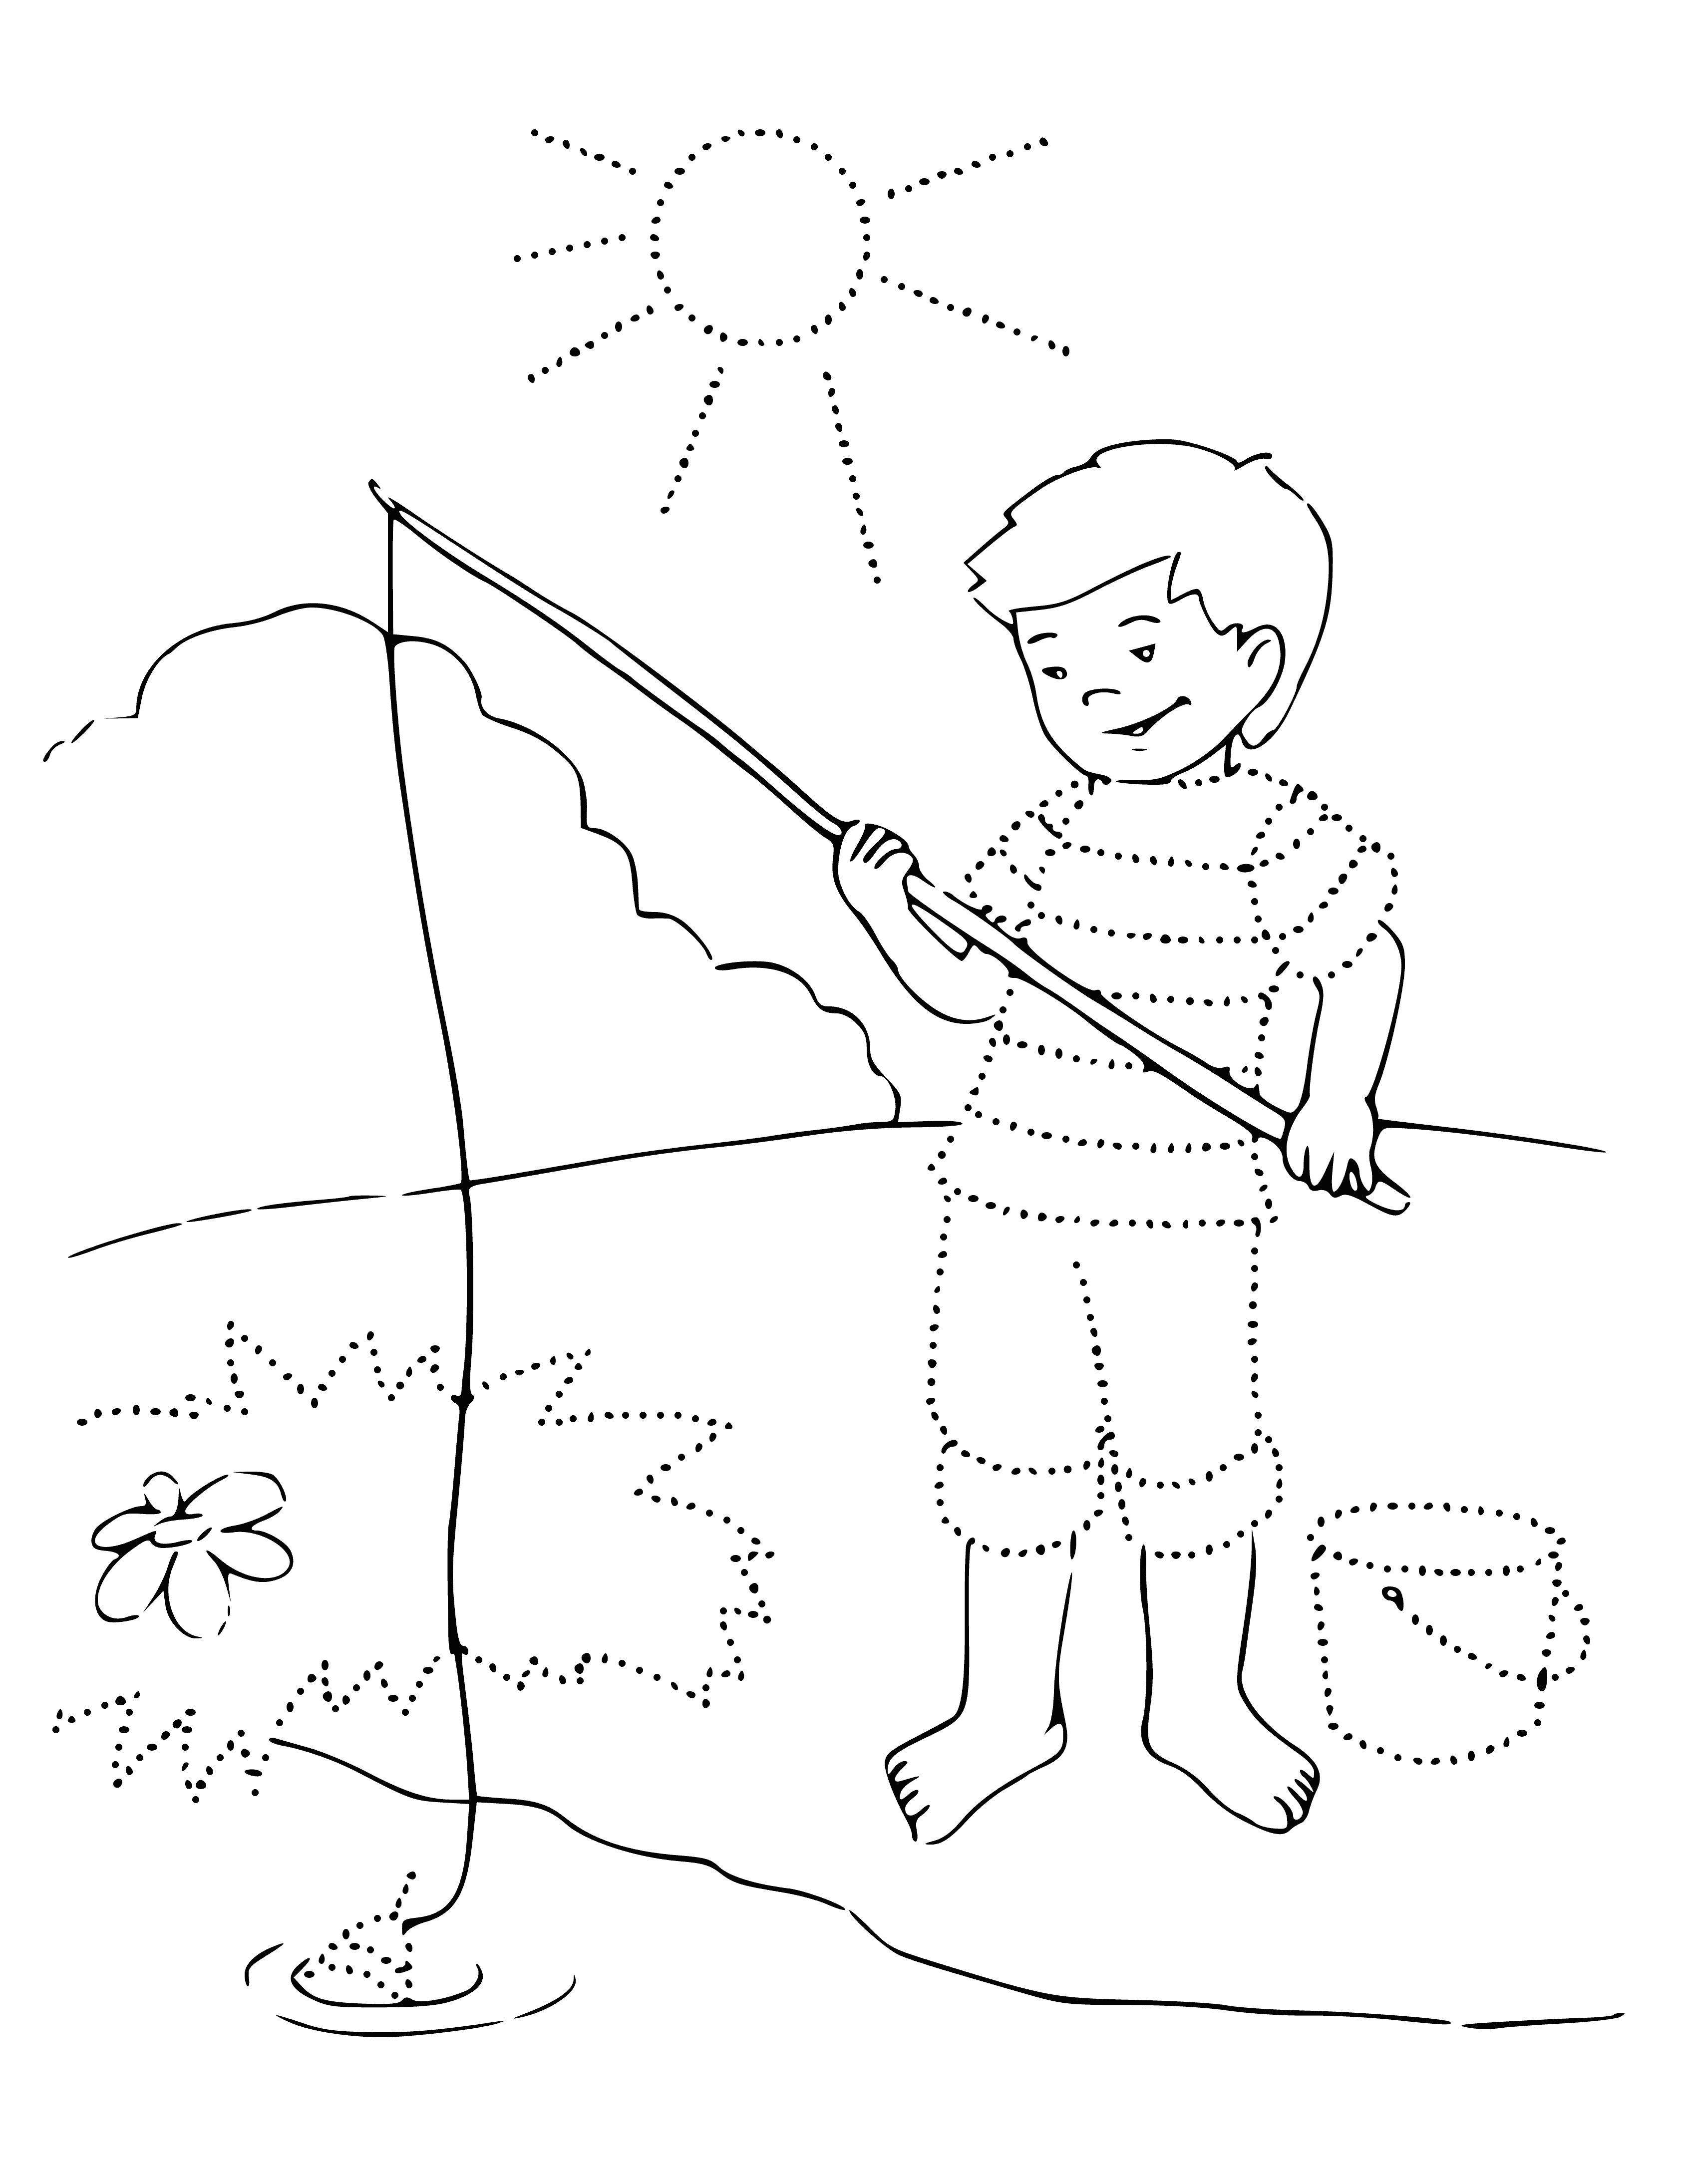 Summer fishing coloring page